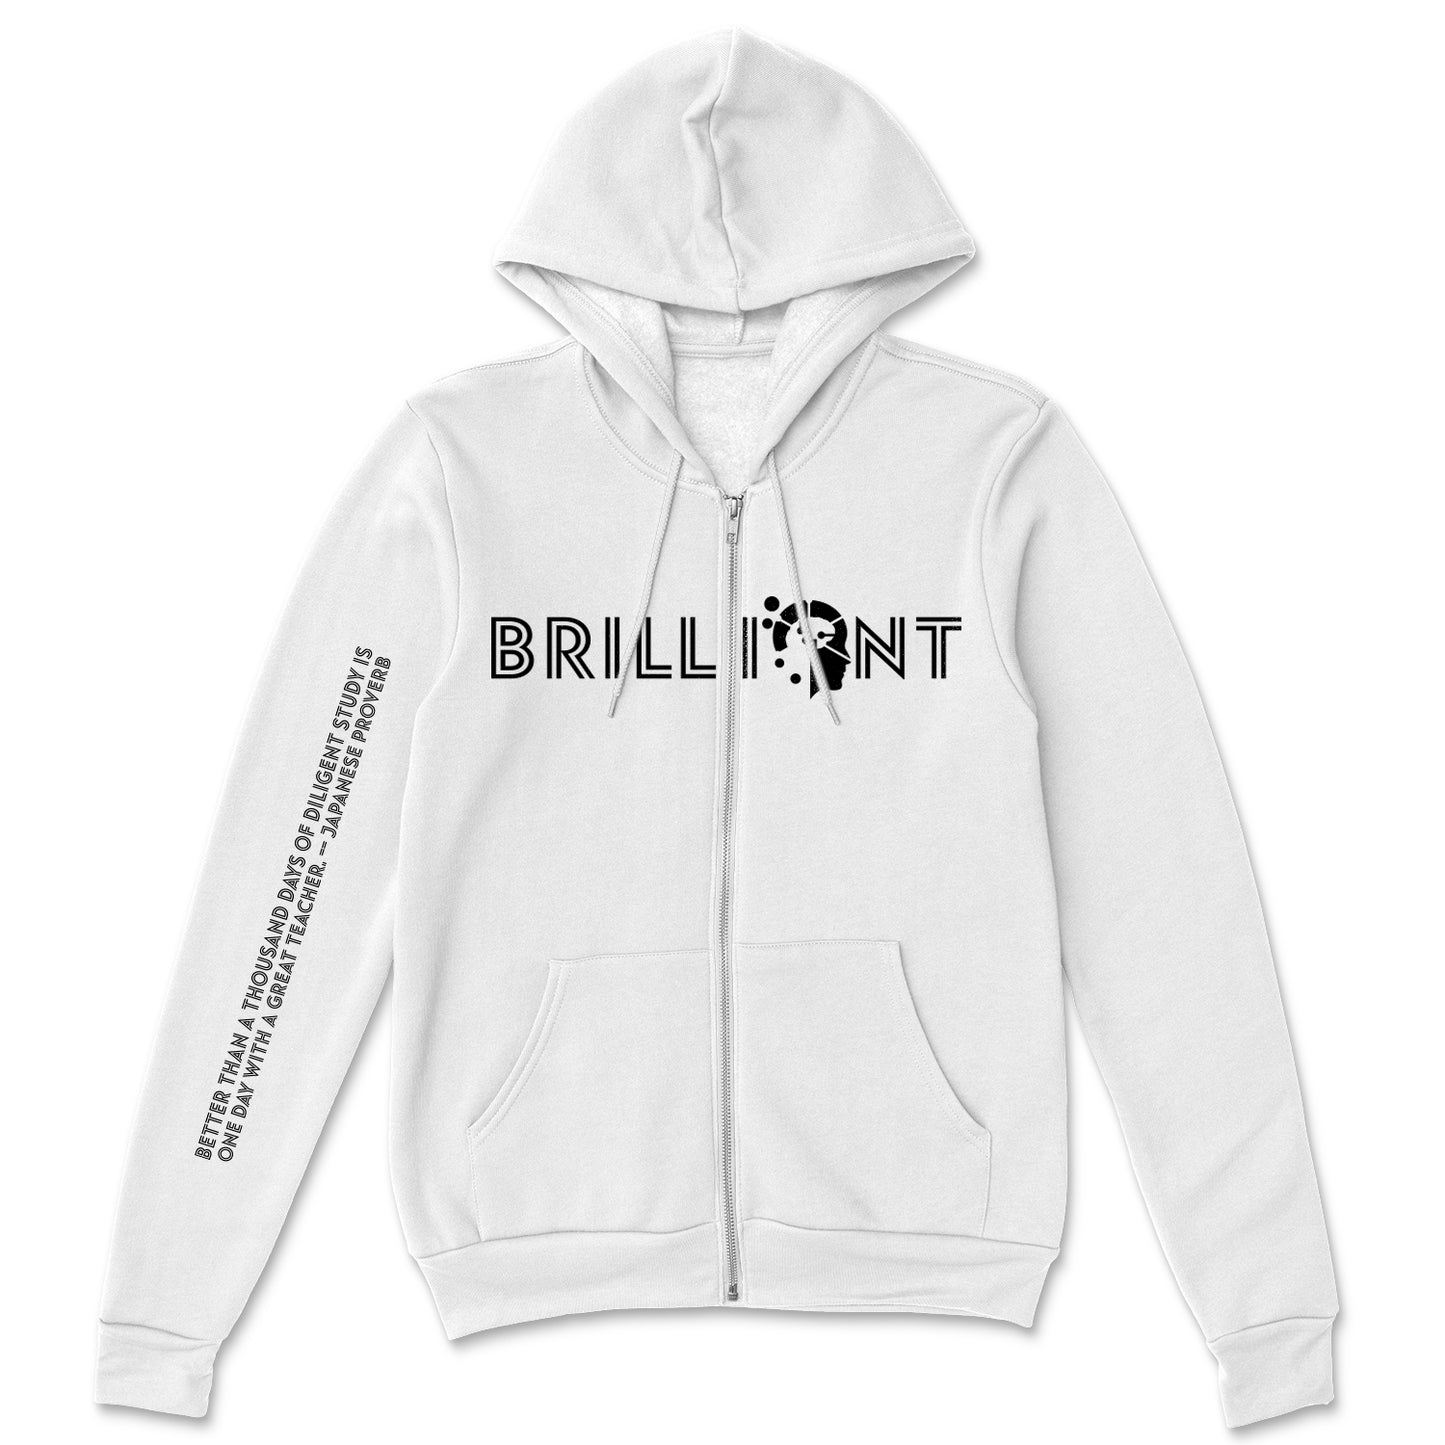 BRILLIANT AND DEDICATED SLEEVE QUOTE HOODIE